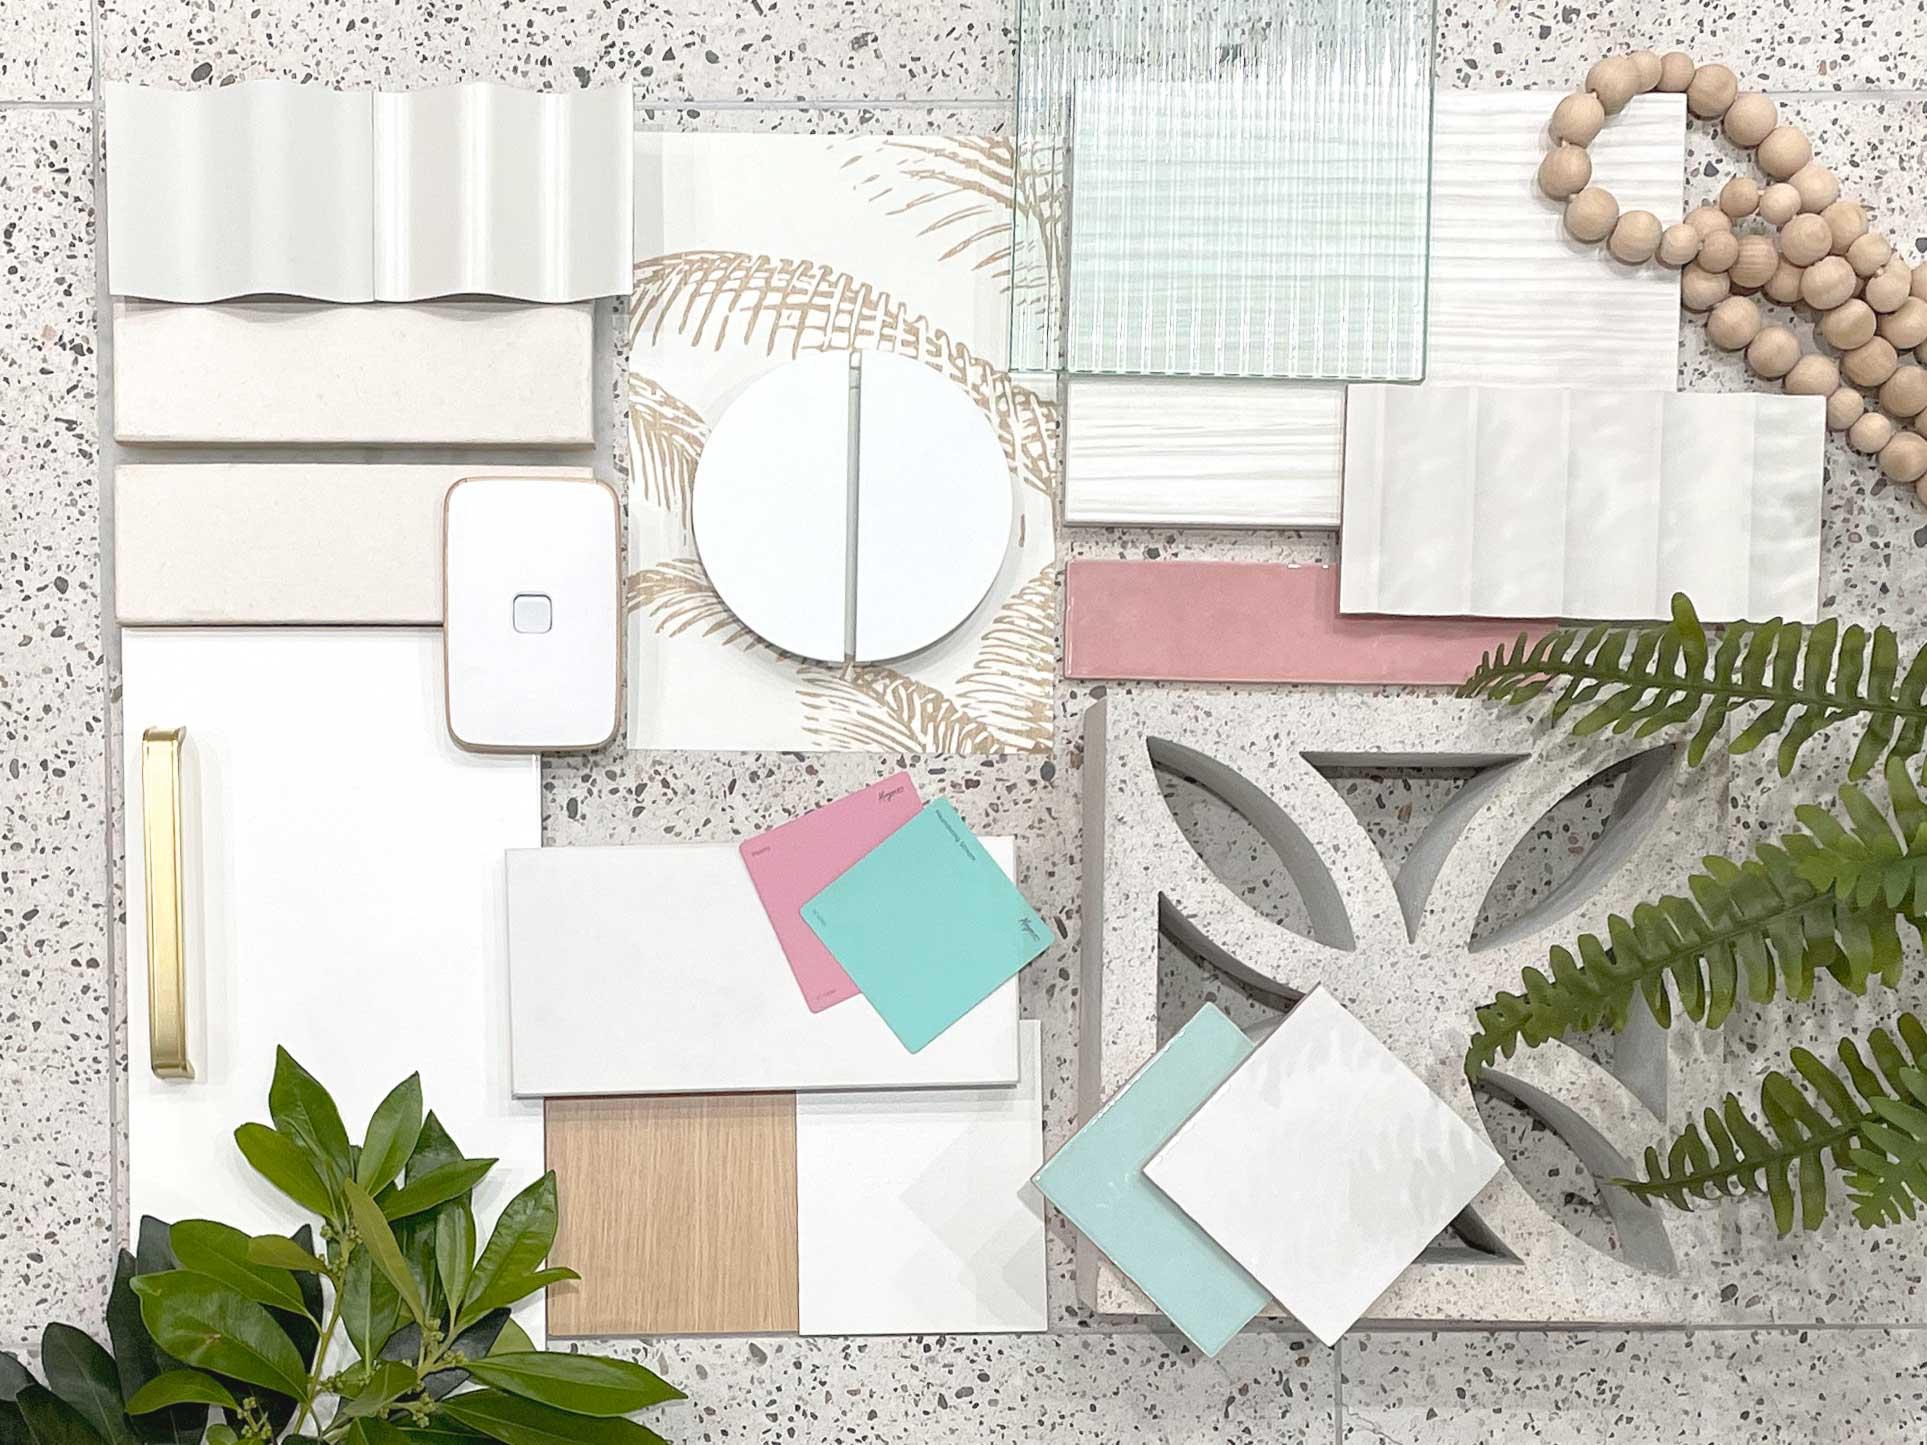 Pale Tones flatlay incorporating COLORBOND® steel. These pale tones are naturally inspired, light and equally at home on contemporary or heritage buildings. Photographer: Yana Wood